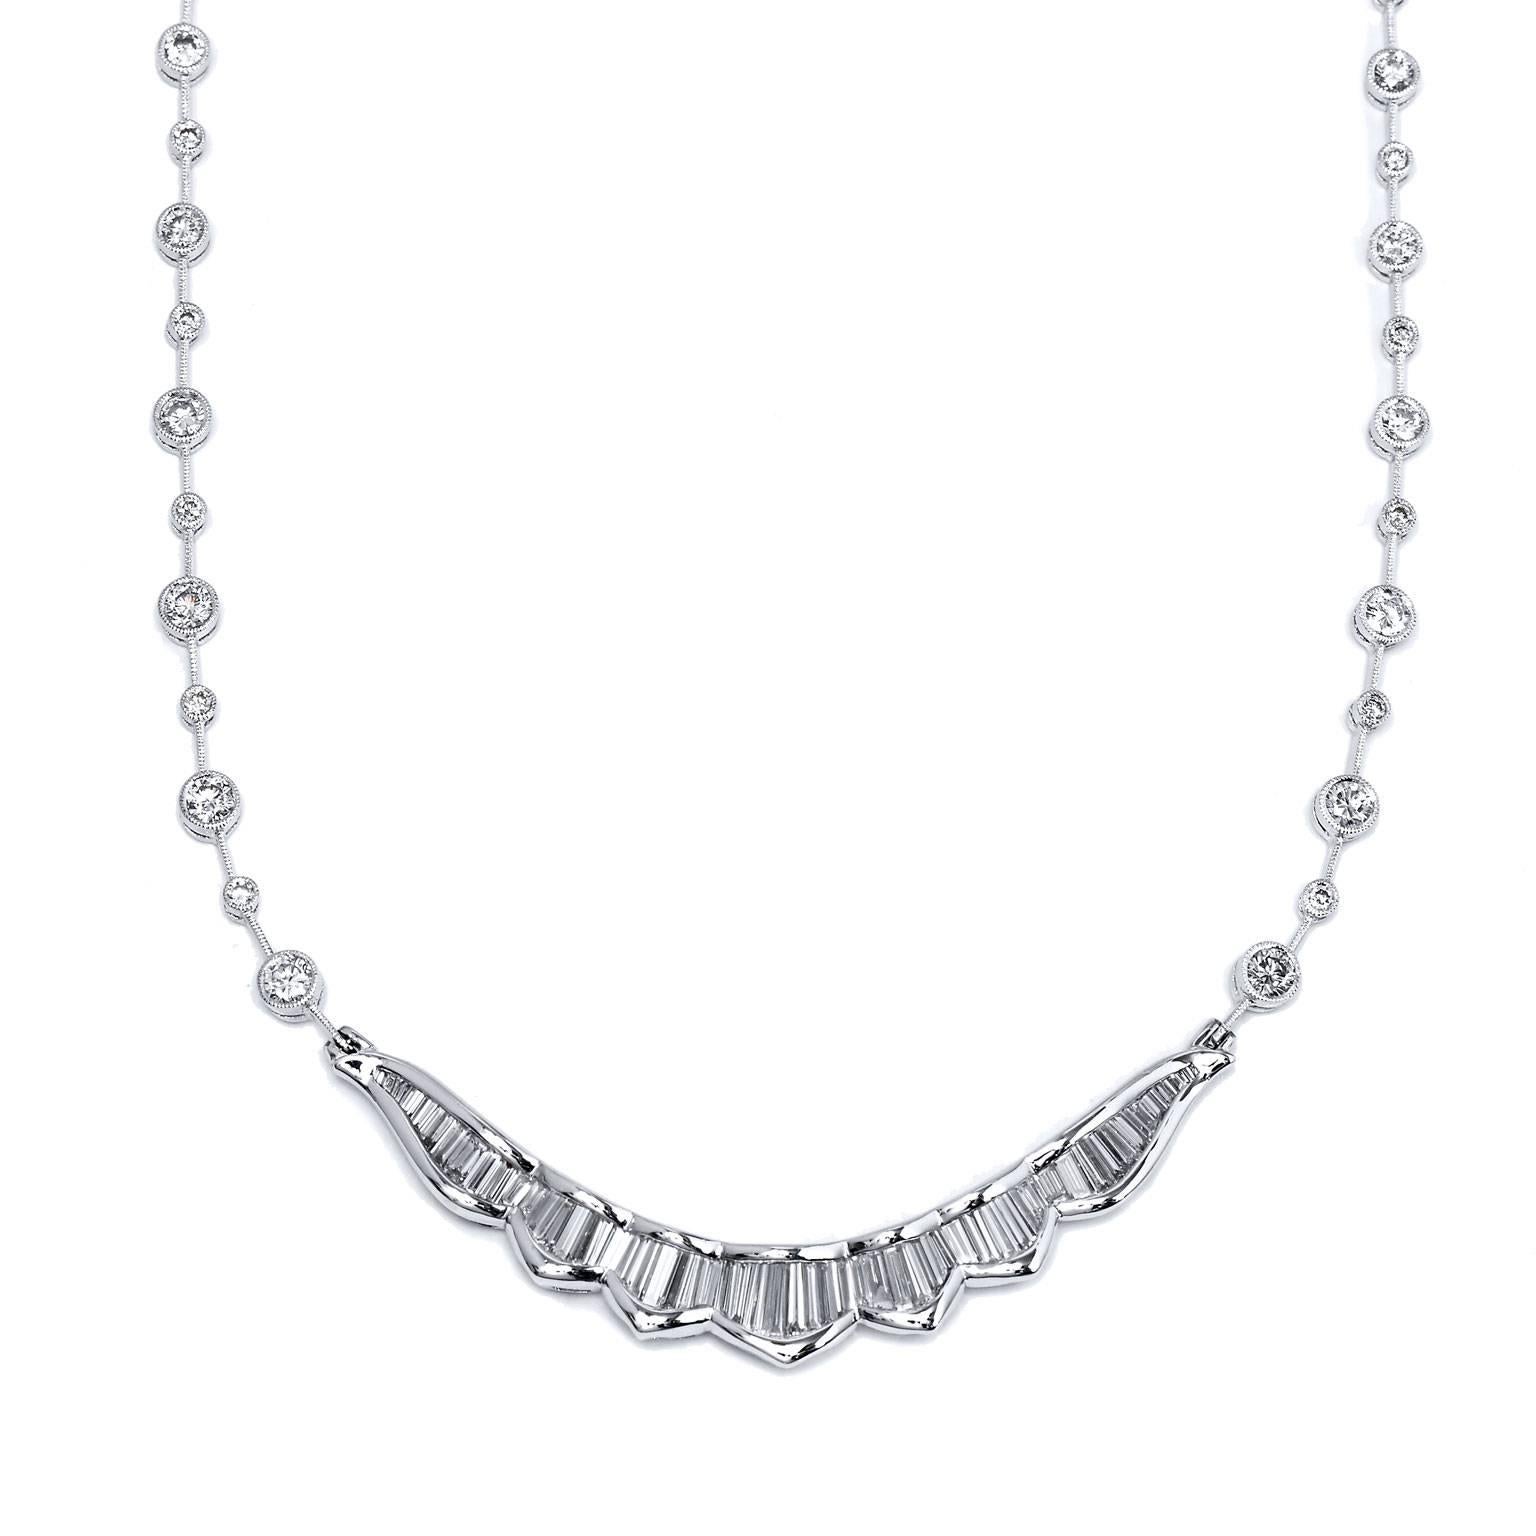 Enjoy this previously loved 18 karat white gold necklace featuring a total weight of 4.58 carat in diamond. 2.08 carat of individually bezel set diamond (I/J/SI1) stream like drew drops as they pool into a stream of 2.50 carat of channel set